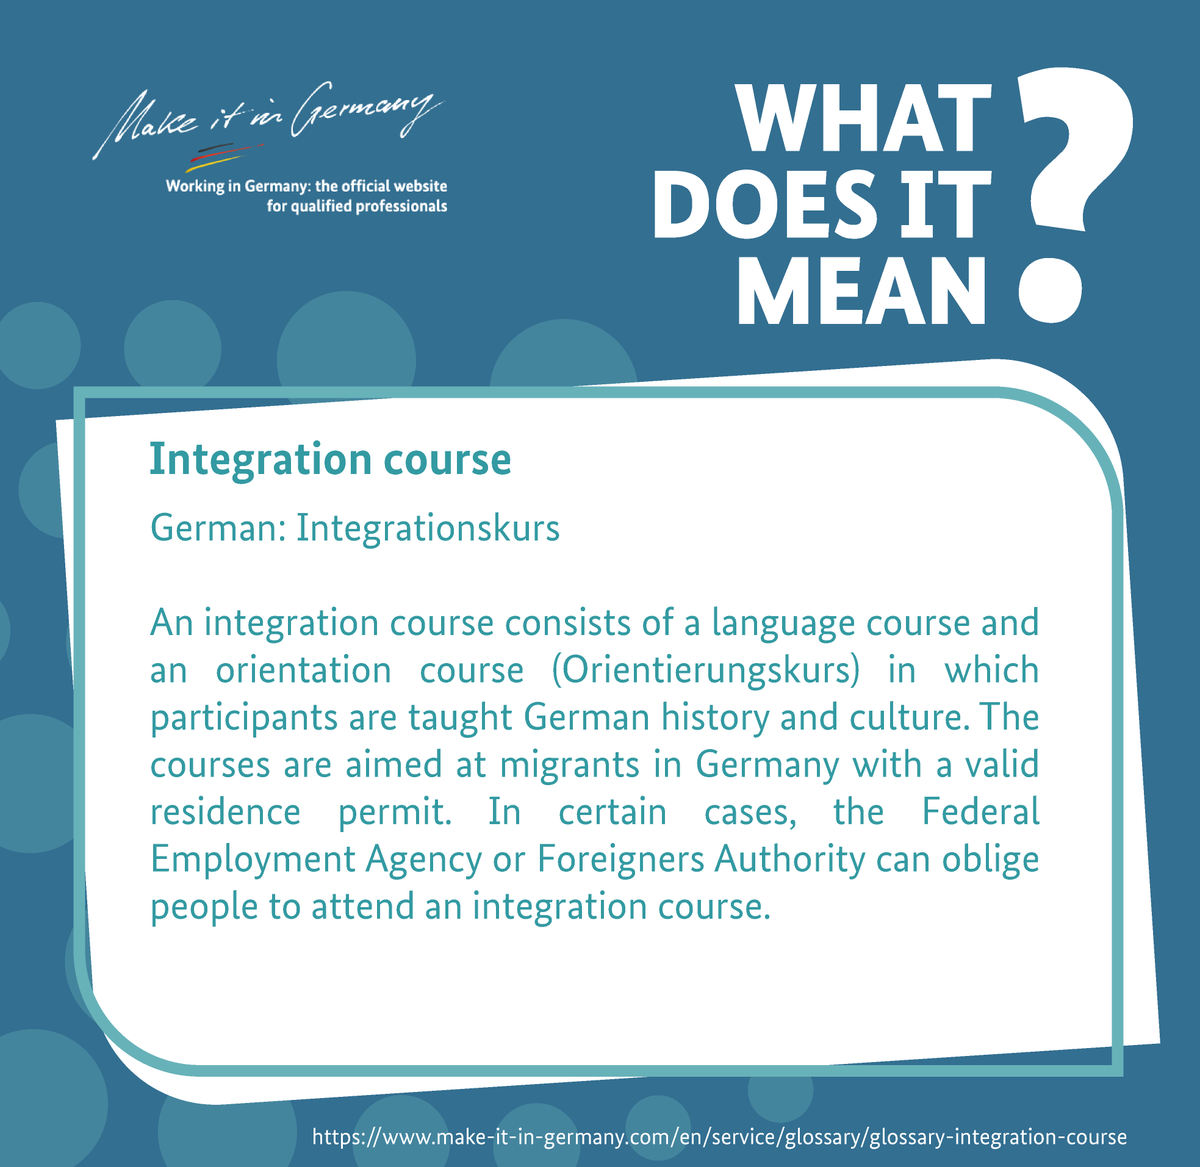 What is an #integration course in #Germany? 🧐 In Germany, integration courses are official #language courses and orientation courses. They are a great option for learning more about the #German society 🇩🇪🗨️ Learn more: make-it-in-germany.com/en/living-in-g…